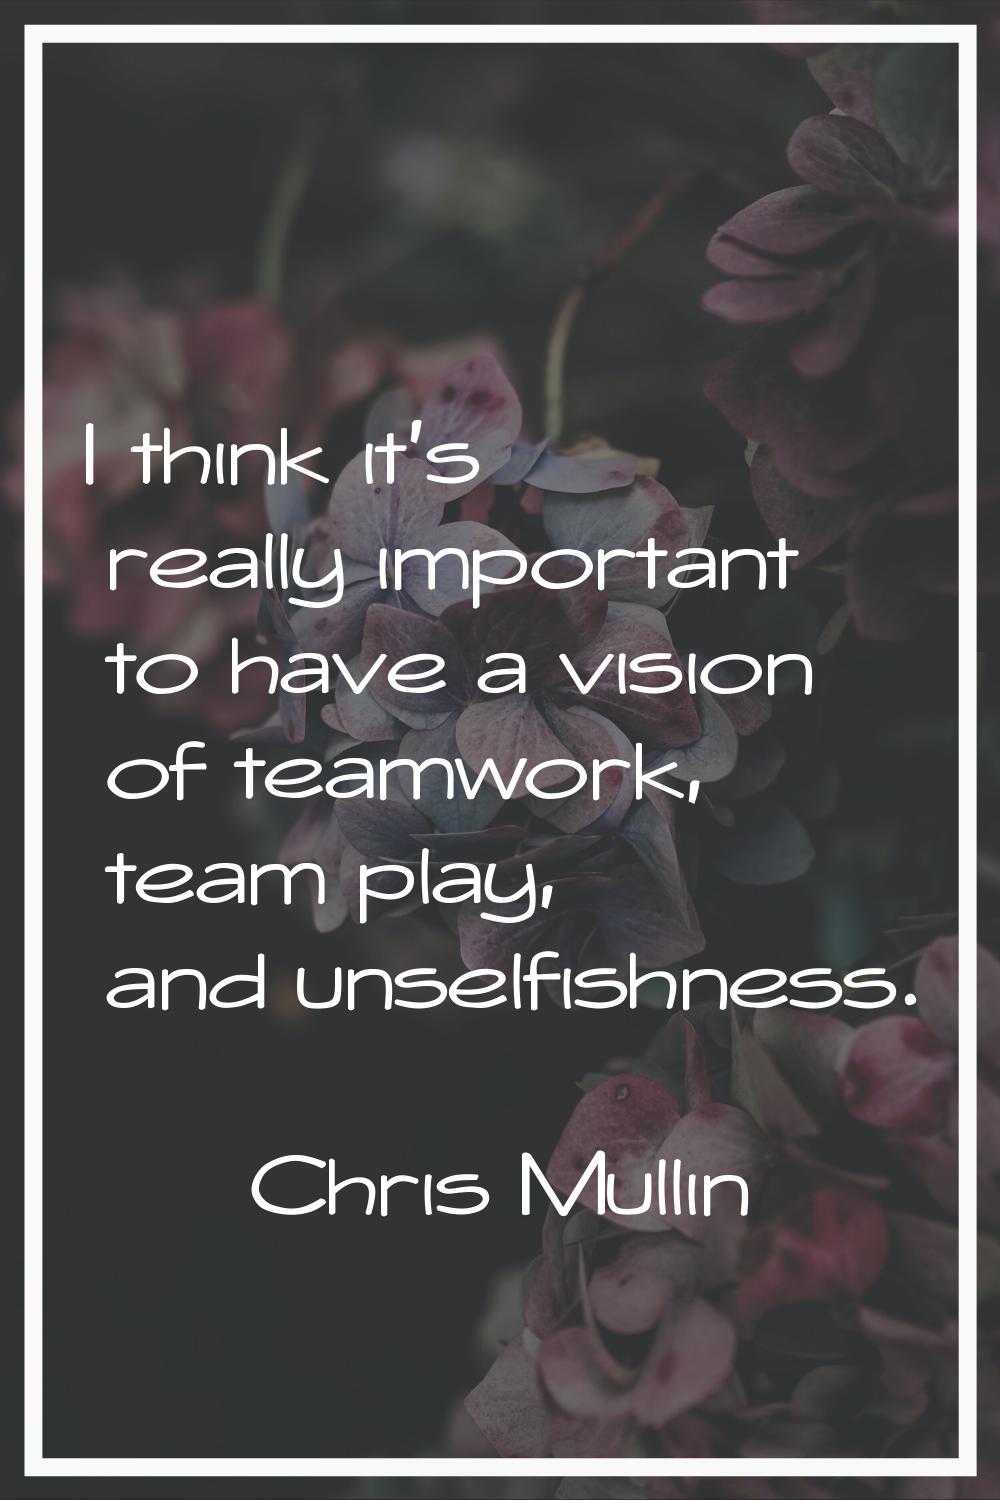 I think it's really important to have a vision of teamwork, team play, and unselfishness.